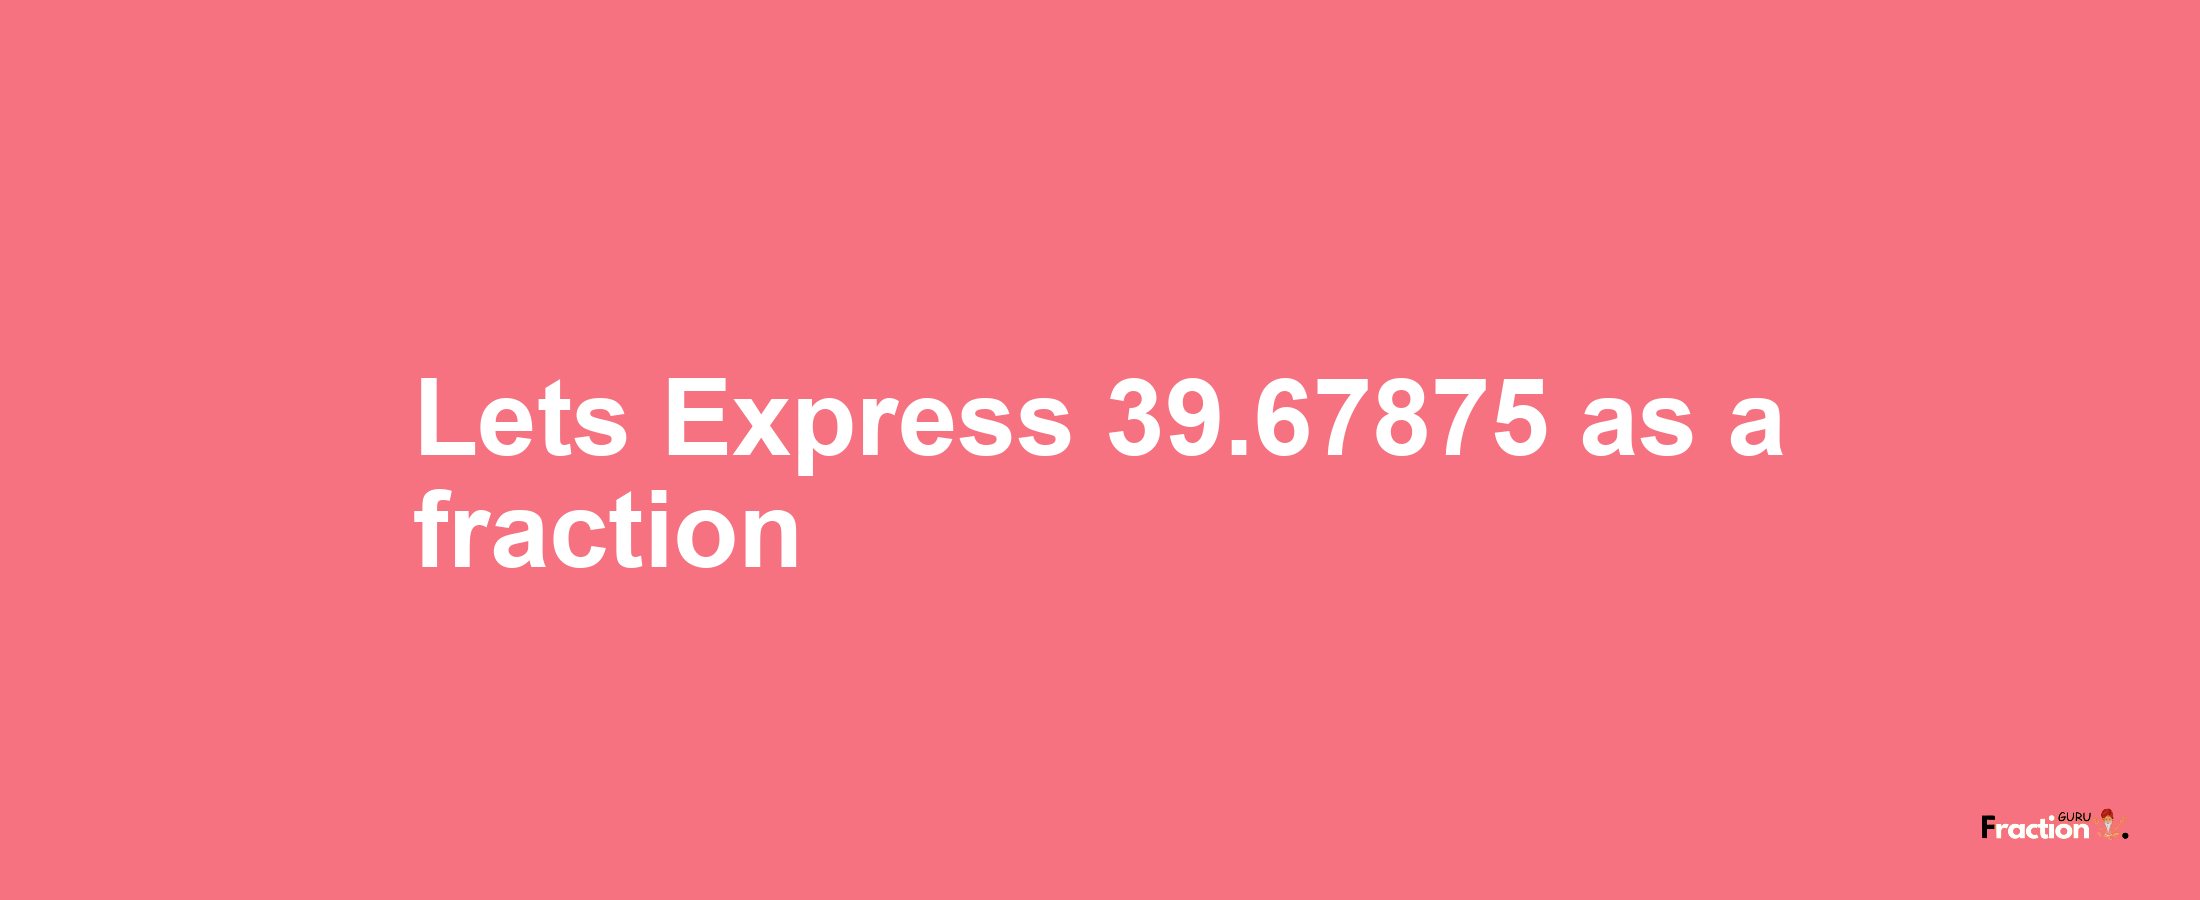 Lets Express 39.67875 as afraction